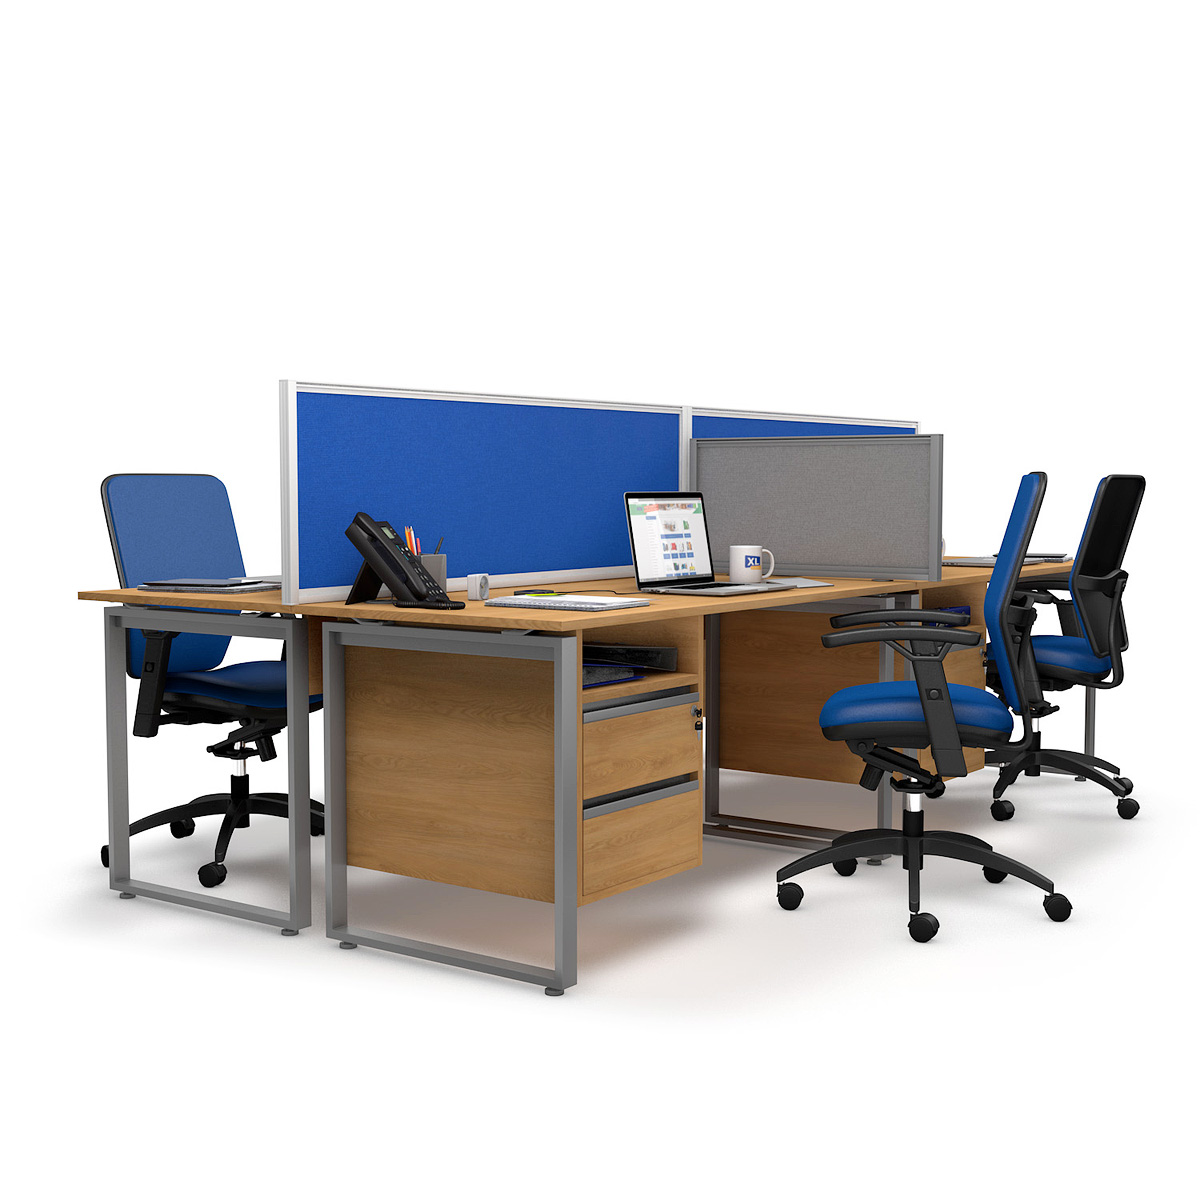 FRONTIER® Office Screen Desk Dividers Can be Linked to Other Screens to Form Mini Cubicles in Open Plan Offices